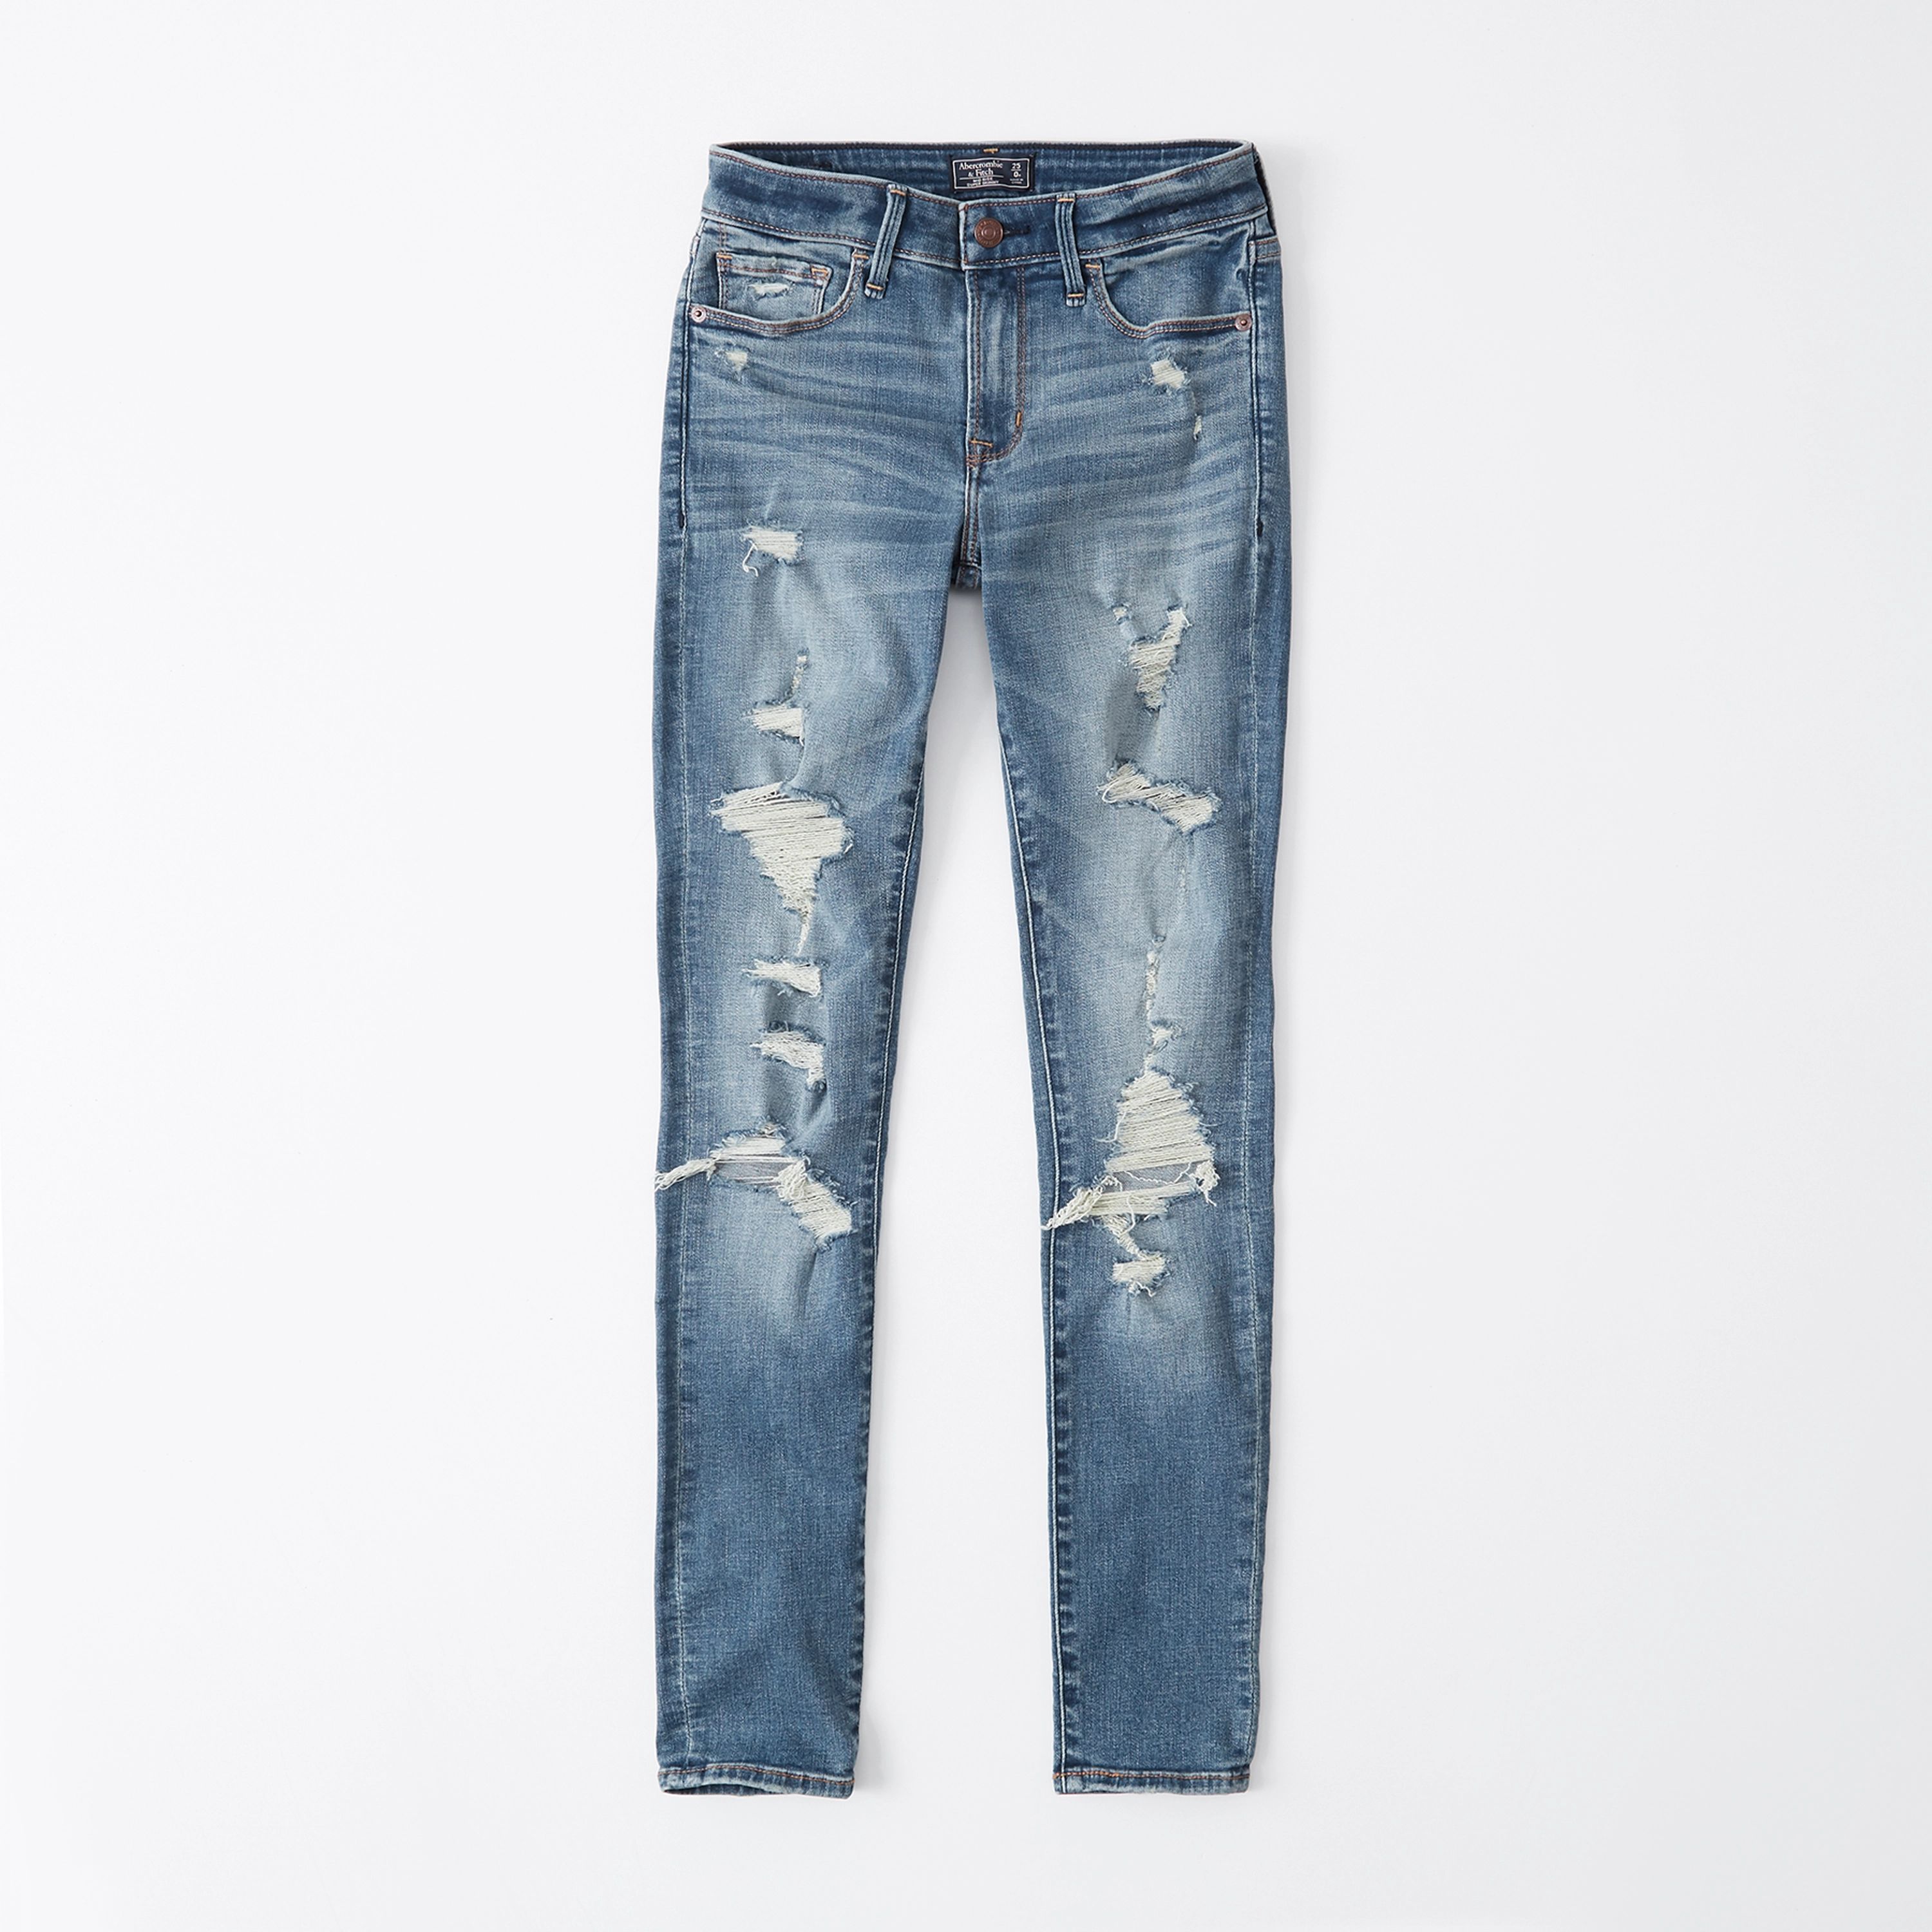 A&F Signature Stretch Denim | Online Exclusive
			


  
						Ripped Mid Rise Super Skinny Jeans
... | Abercrombie & Fitch (US)